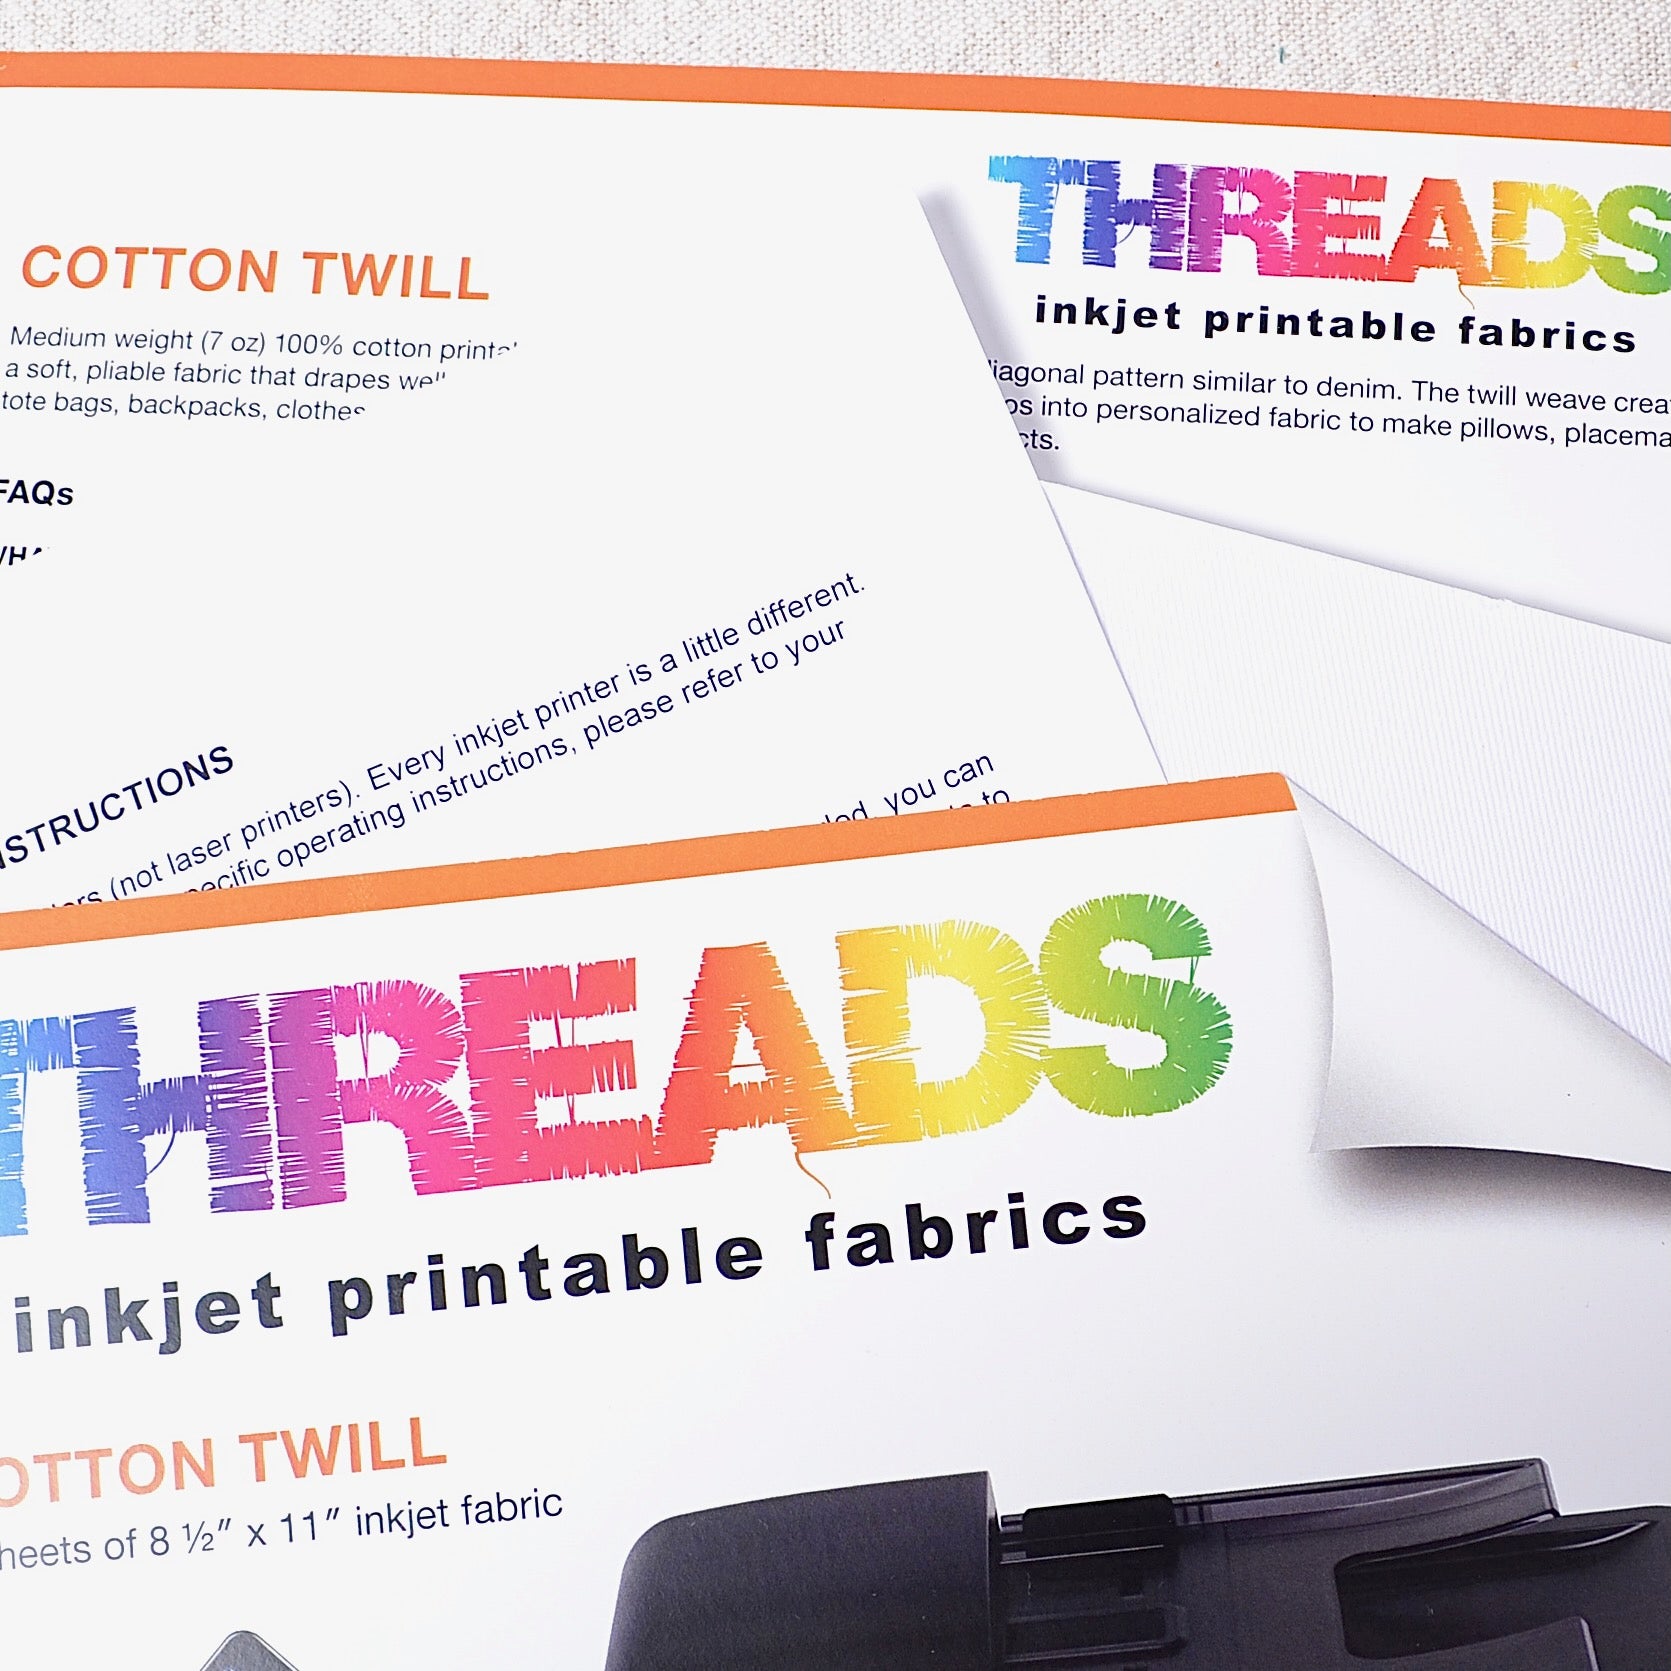 Cotton Twill Inkjet Fabric, 8 1/2in x 11in - A Threaded Needle